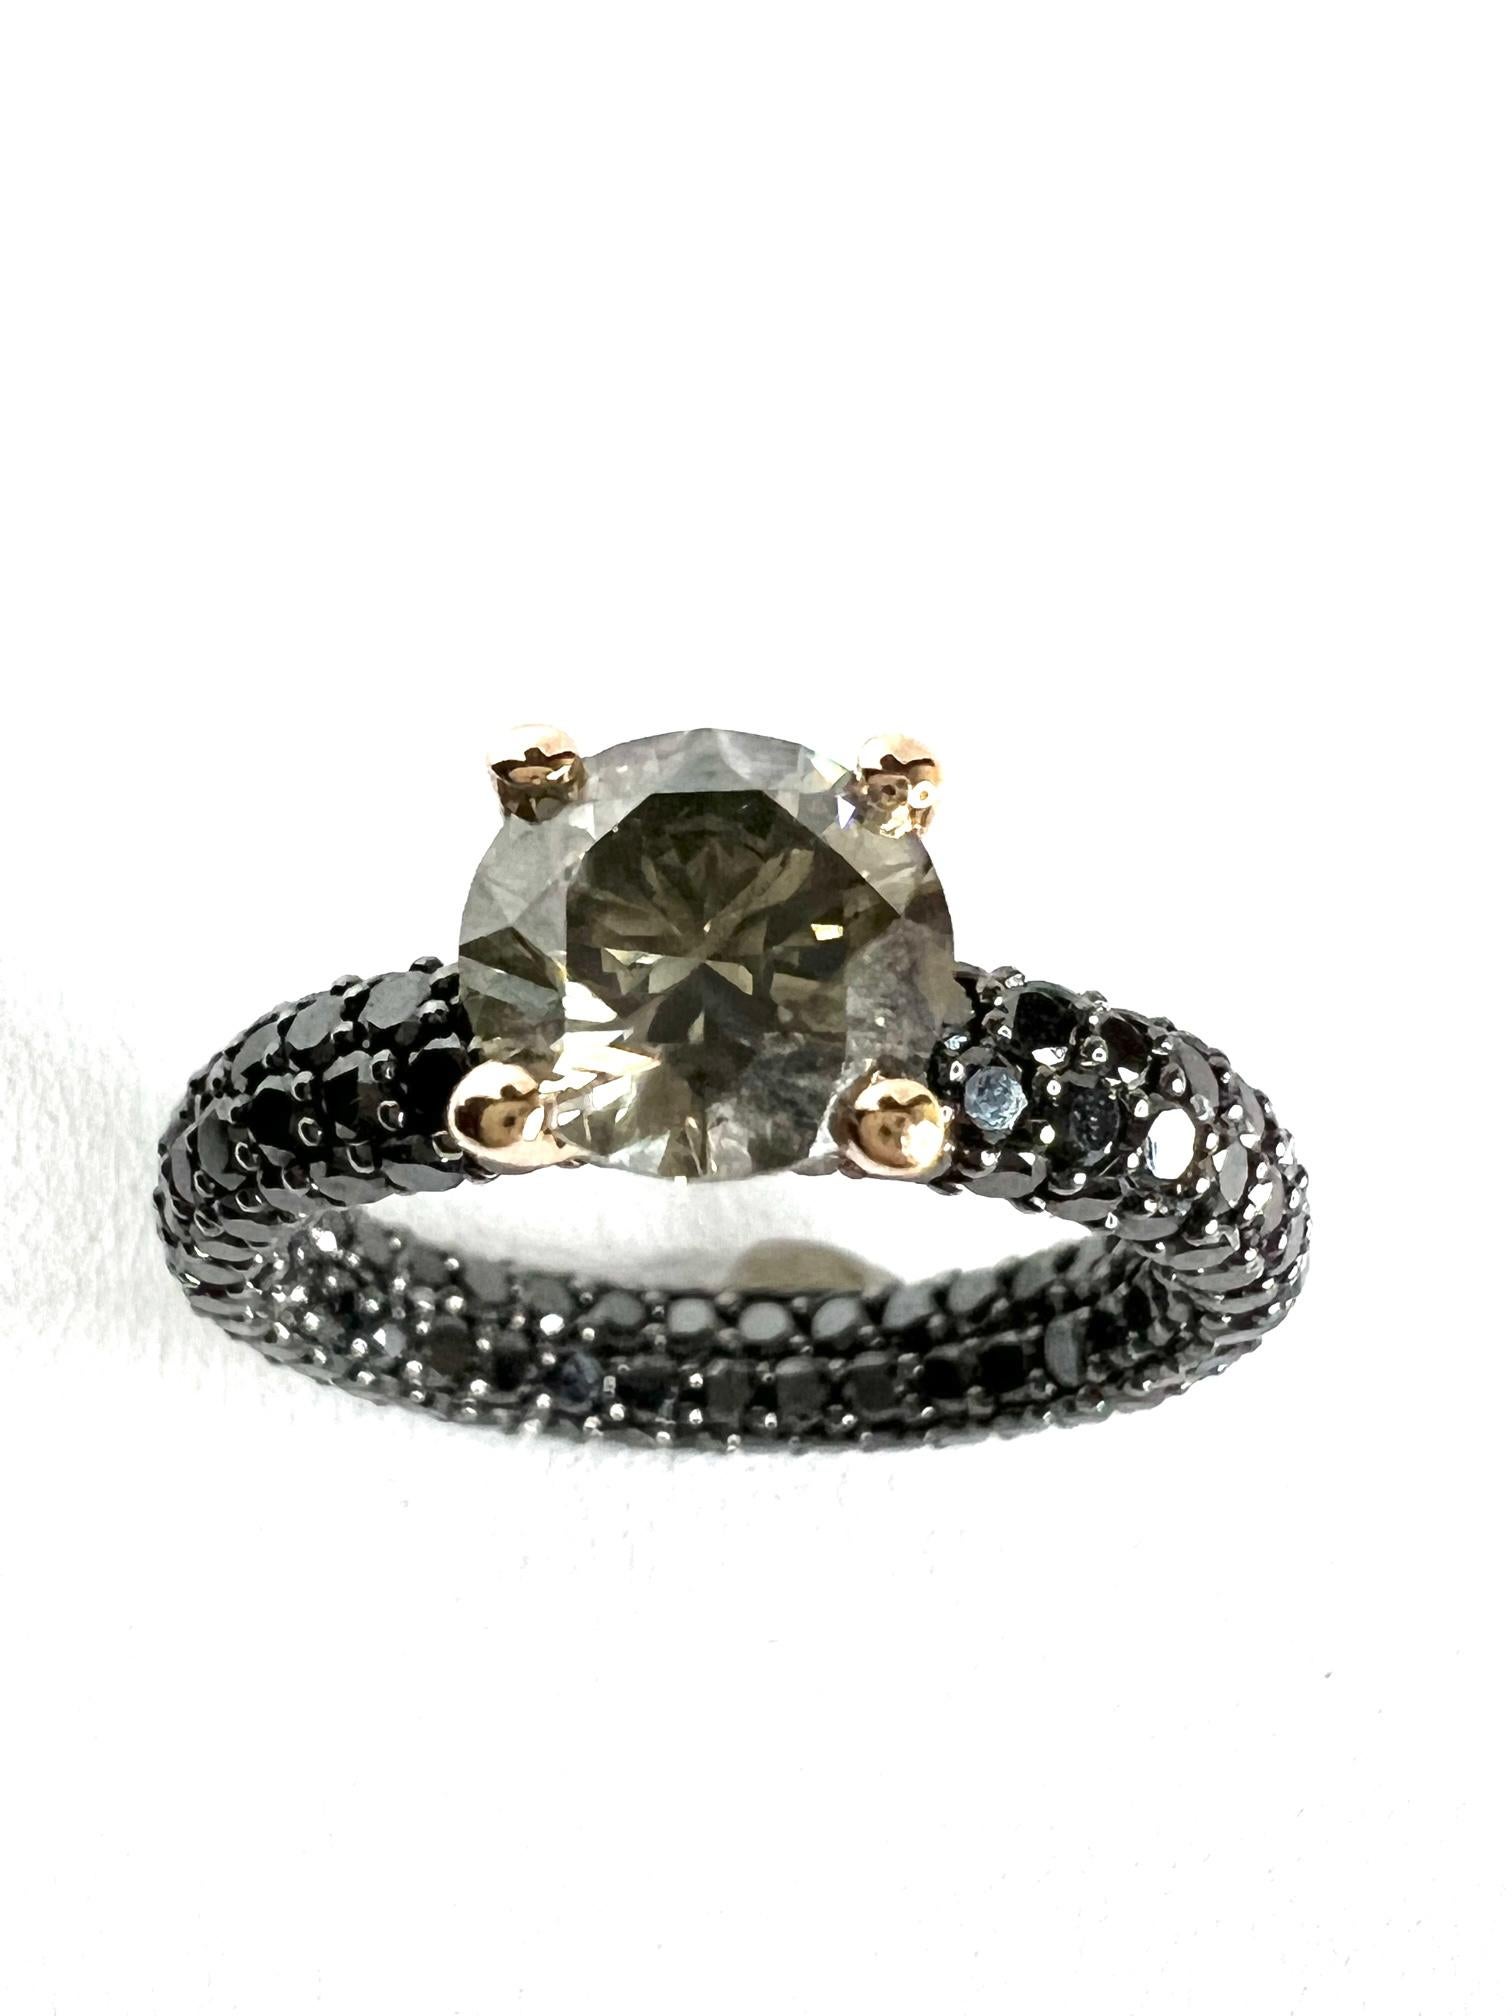 Thomas Leyser is renowned for his contemporary jewellery designs utilizing fine gemstones.

1 red gold 18k ring with 165 black diamonds round 1,3mm, 4,57cts. and 1 diamond round fancy color VS, 7,8mm, 1,77cts..

Ringsize 56 (7,5) is unsizeable.